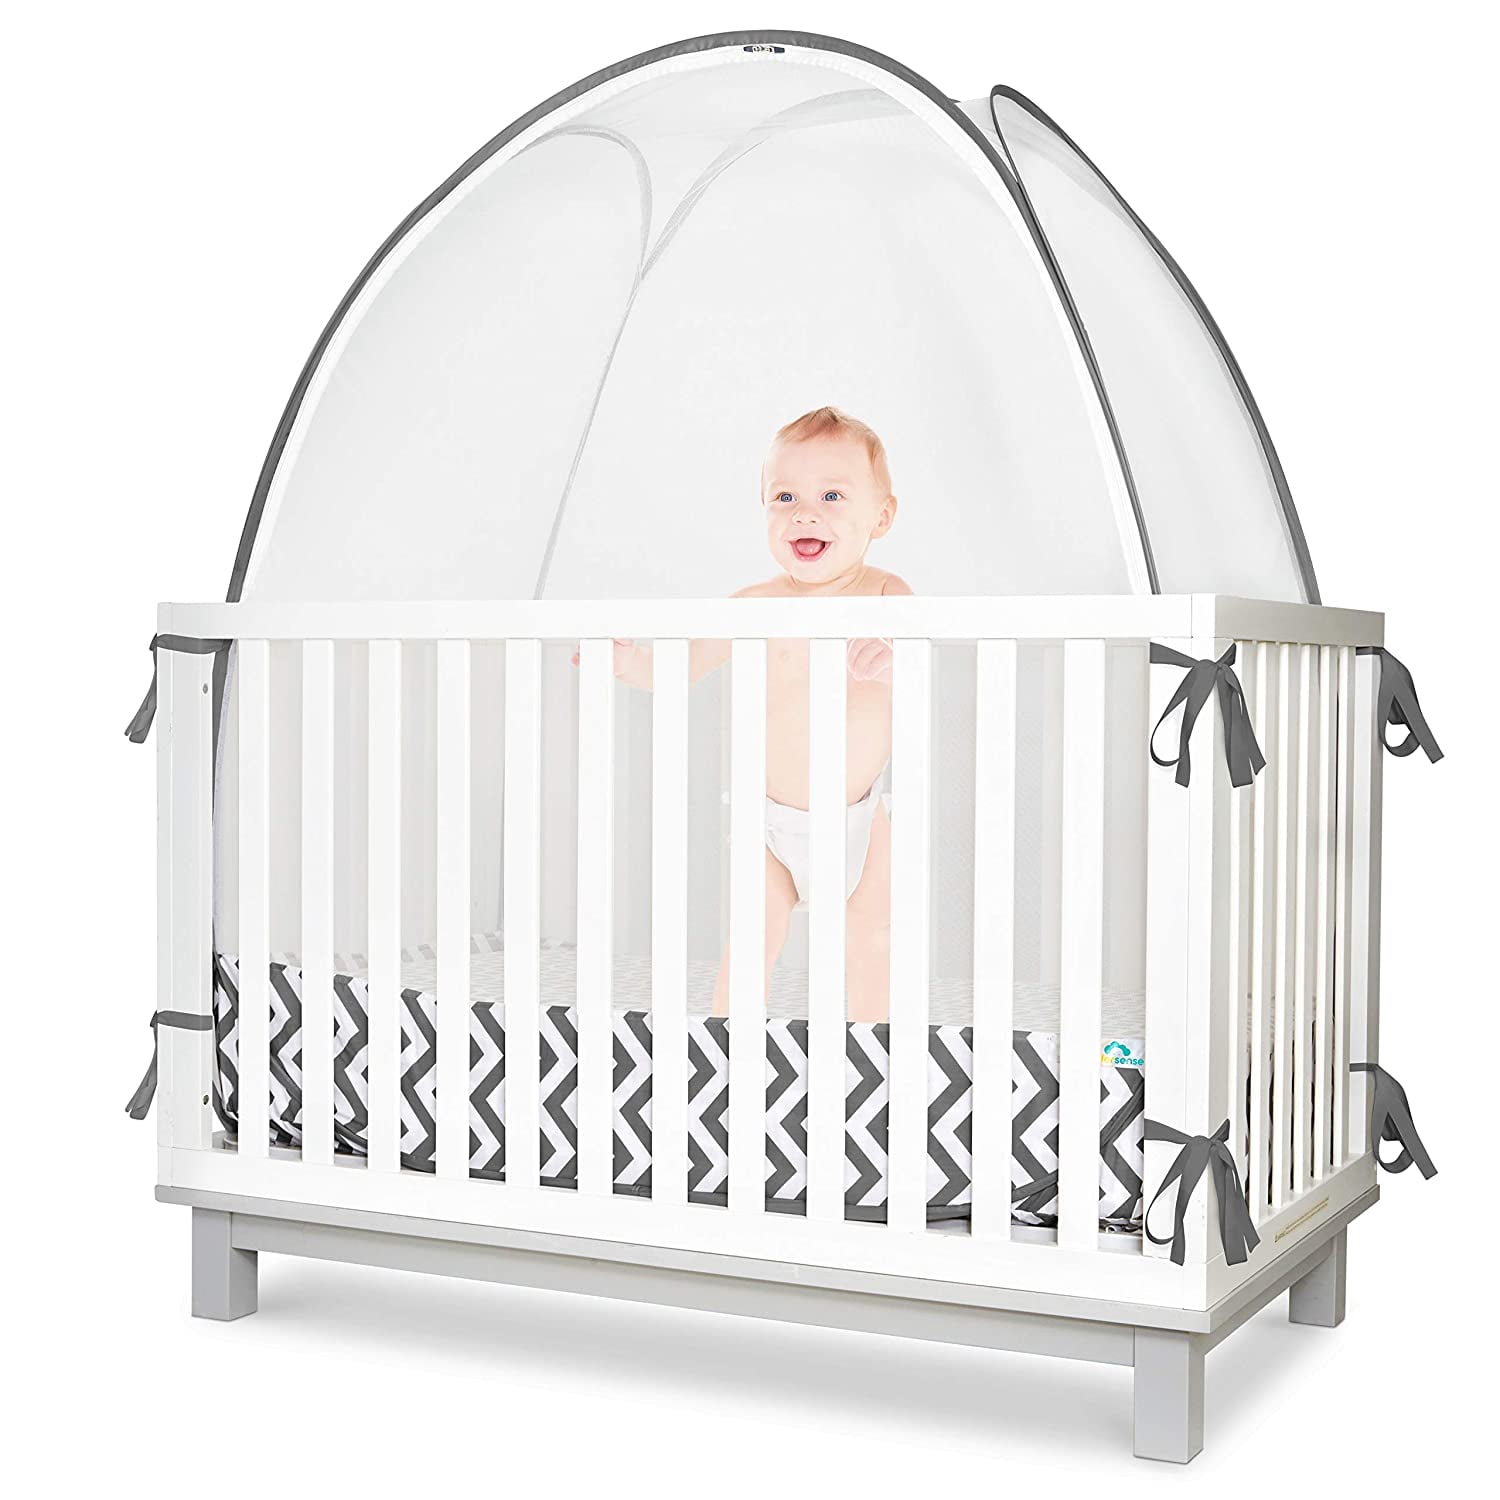 ZXPLO Safety Crib Tent to Keep Baby in Pop up Mosquito Net Netting Canopy Mesh Cover for Toddler Black 